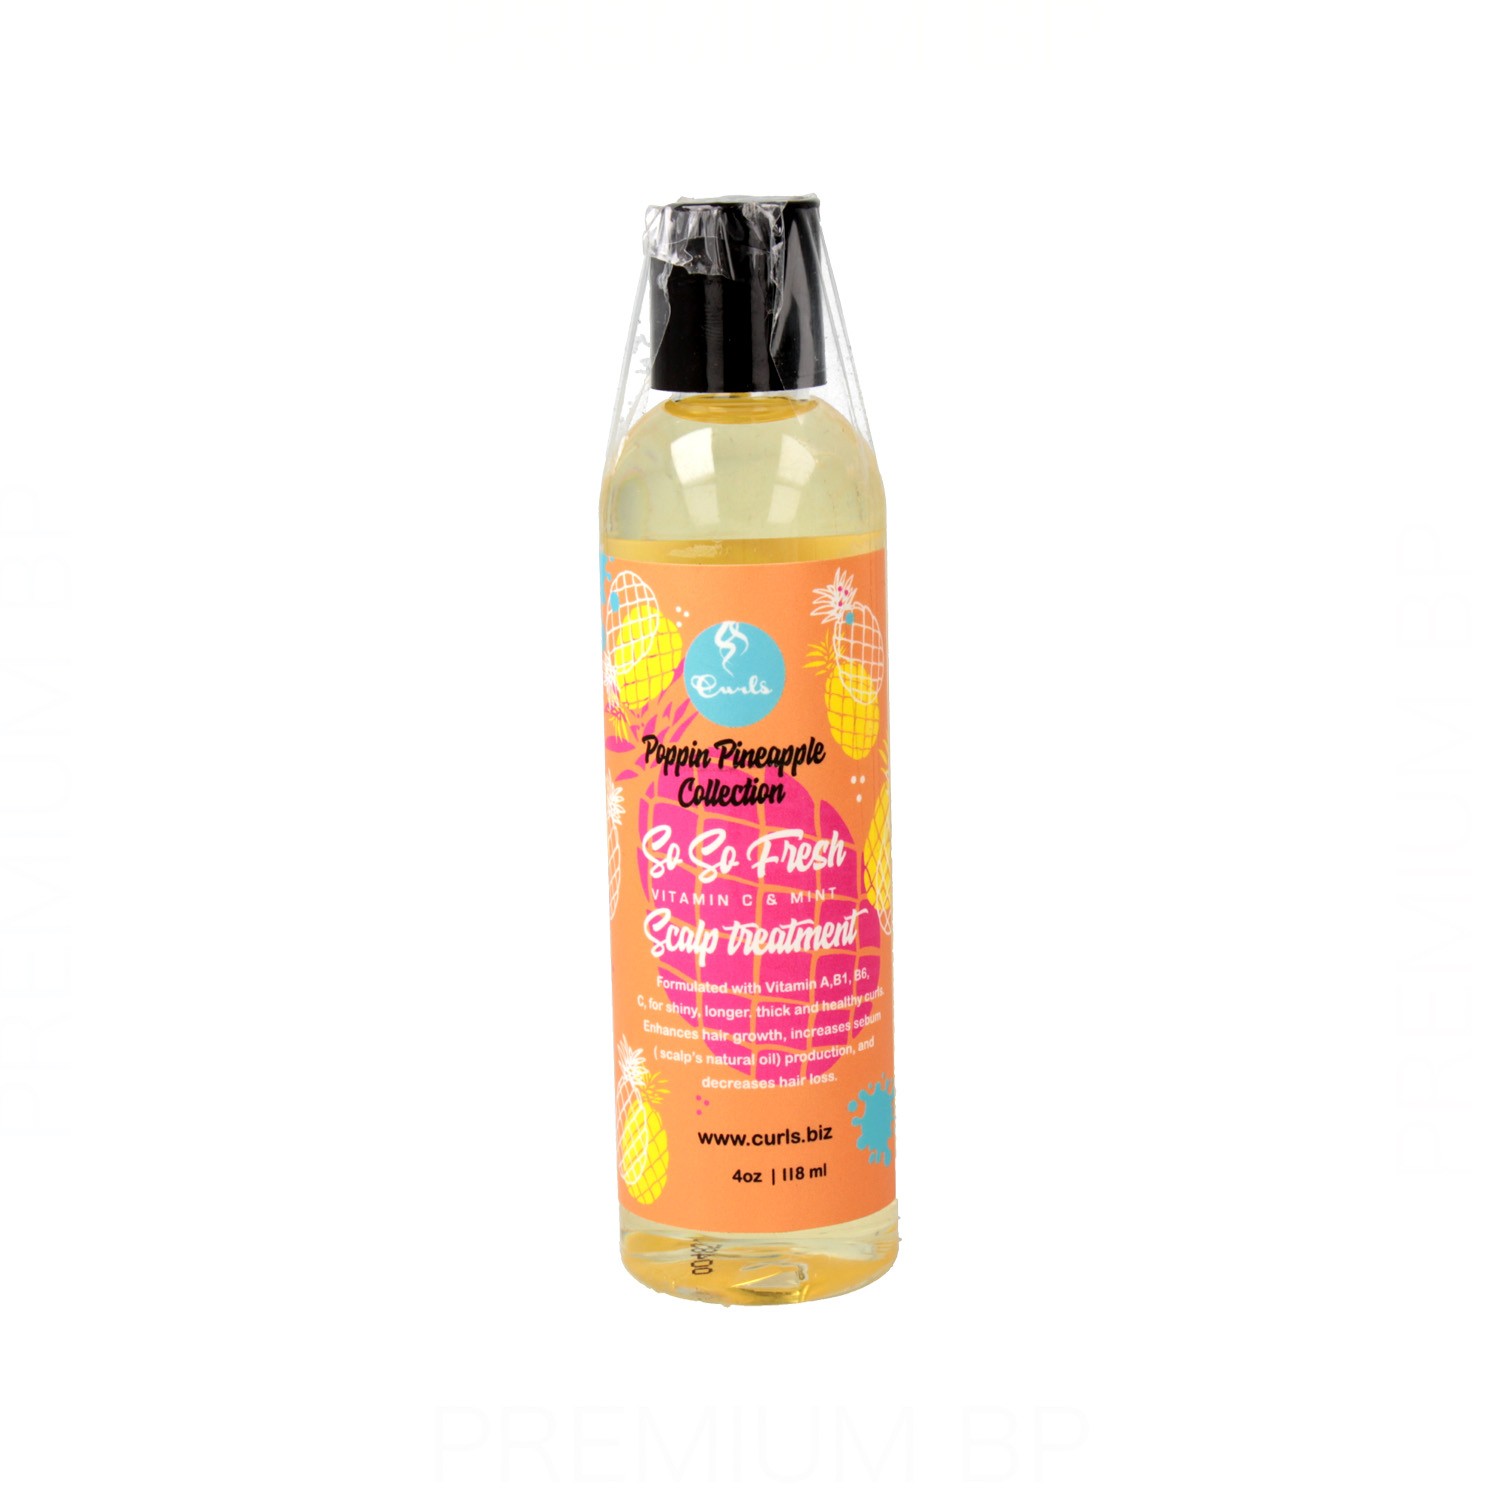 Curls Poppin Pineapple Collection So So Fresh Scalp Treatment 236 ml